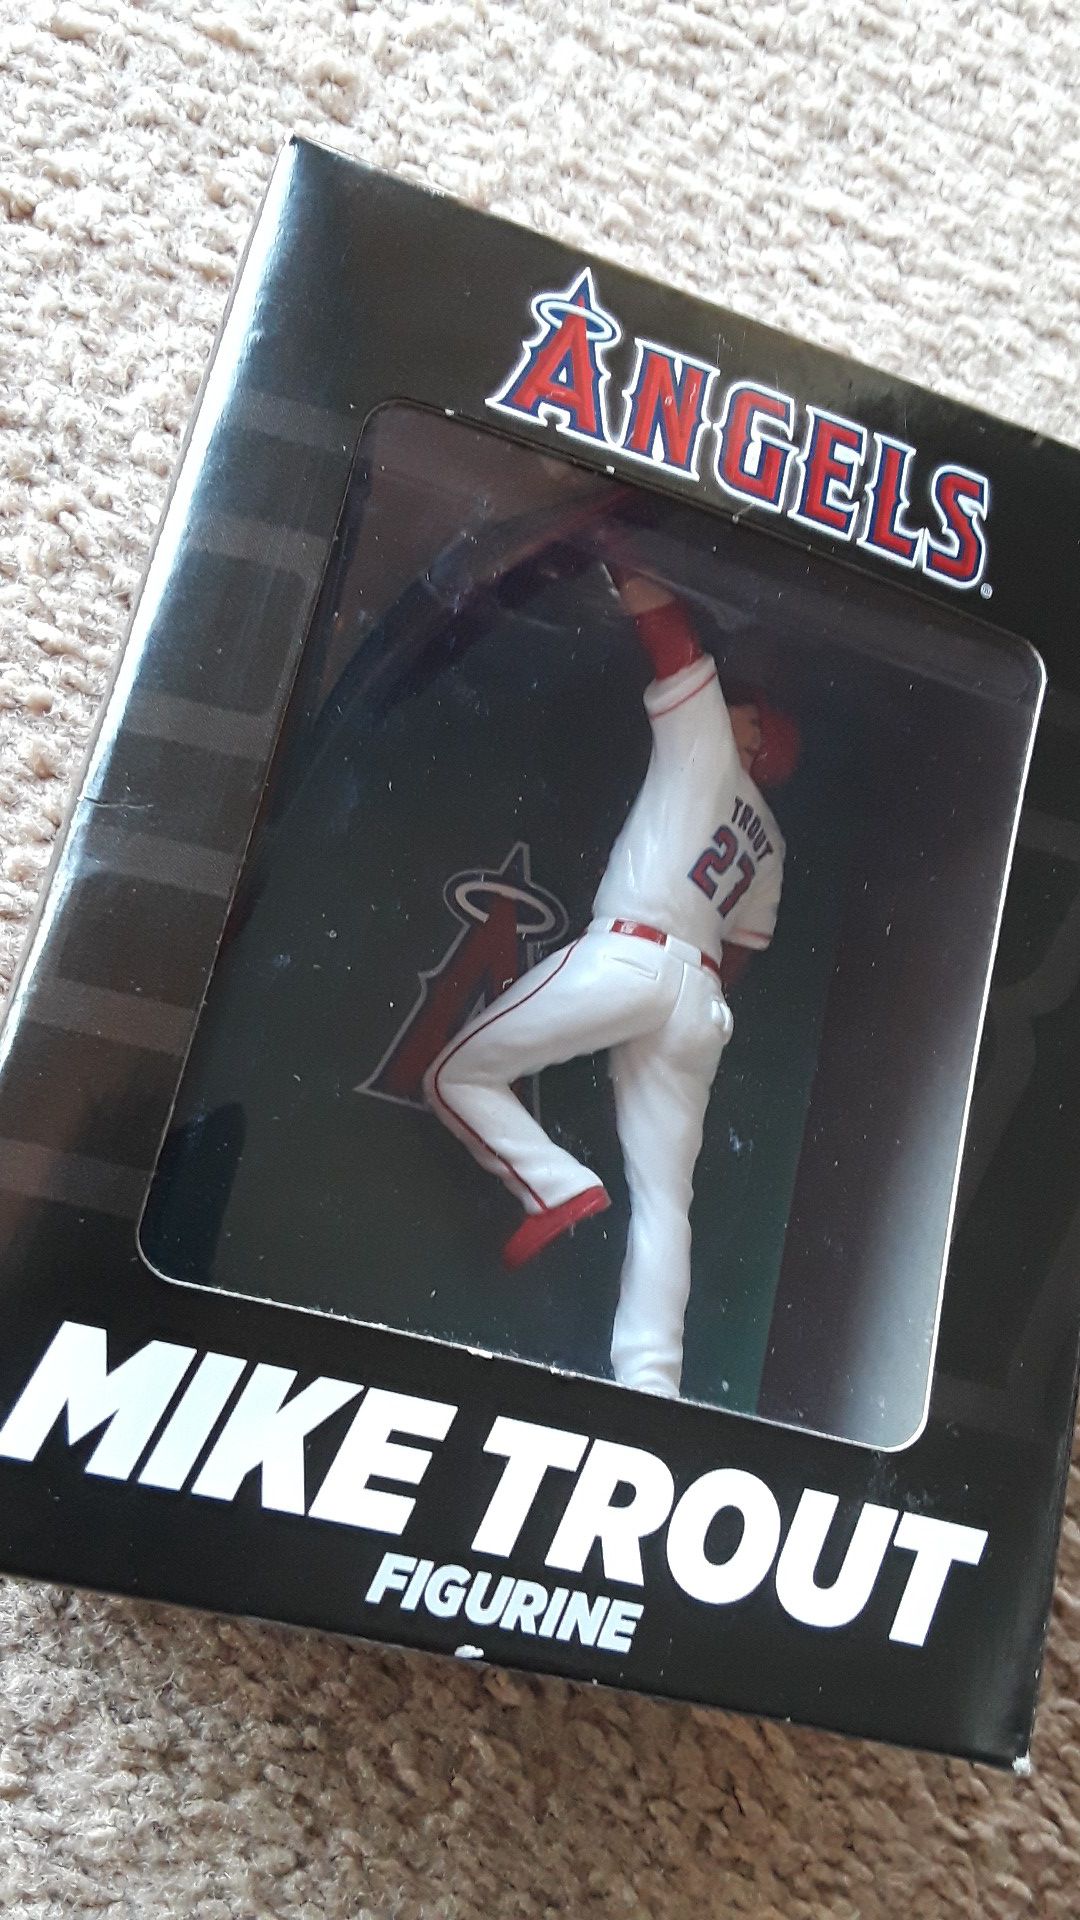 Mike Trout figurine collectible, Angels September 26, 2015, toy statue action figure display bobble tribute nib mint condition, new in the box